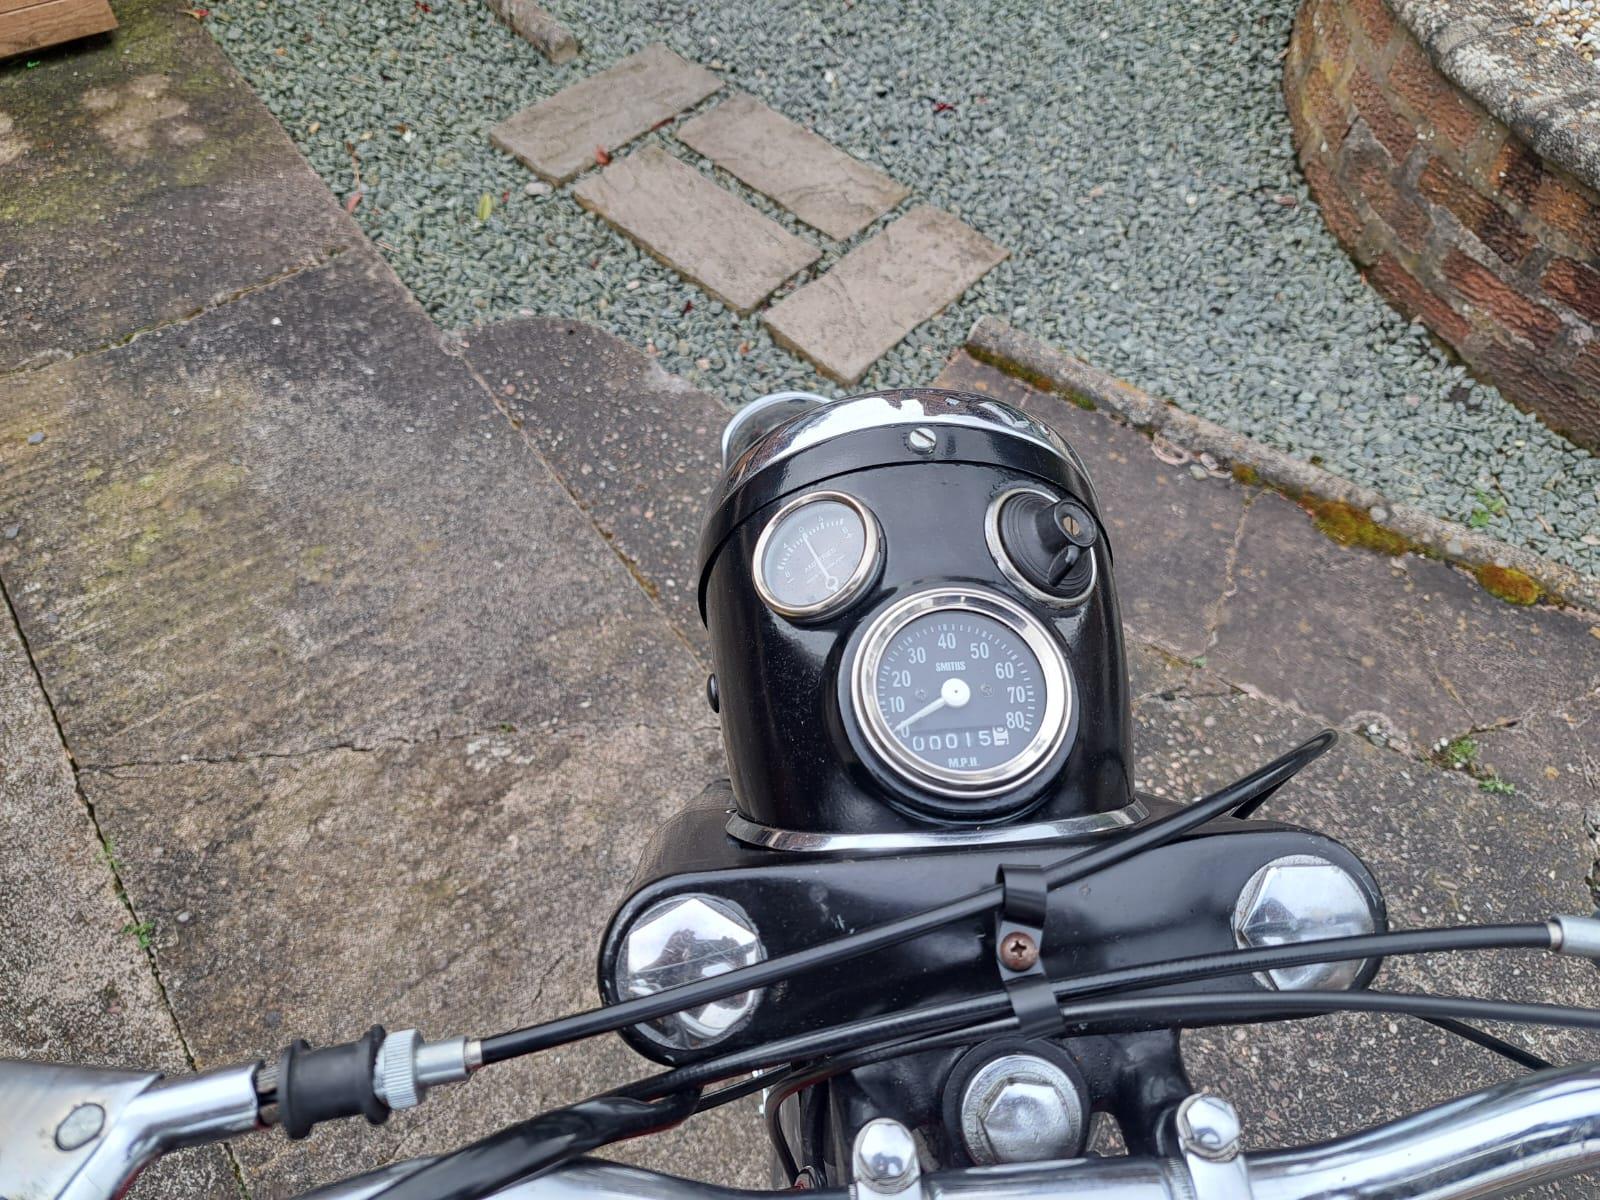 A 1963 BSA 350 MOTORCYCLE - ON A V5C, VENDOR STATES GOOD STARTER AND RUNNER, FROM A PRIVATE - Image 5 of 5